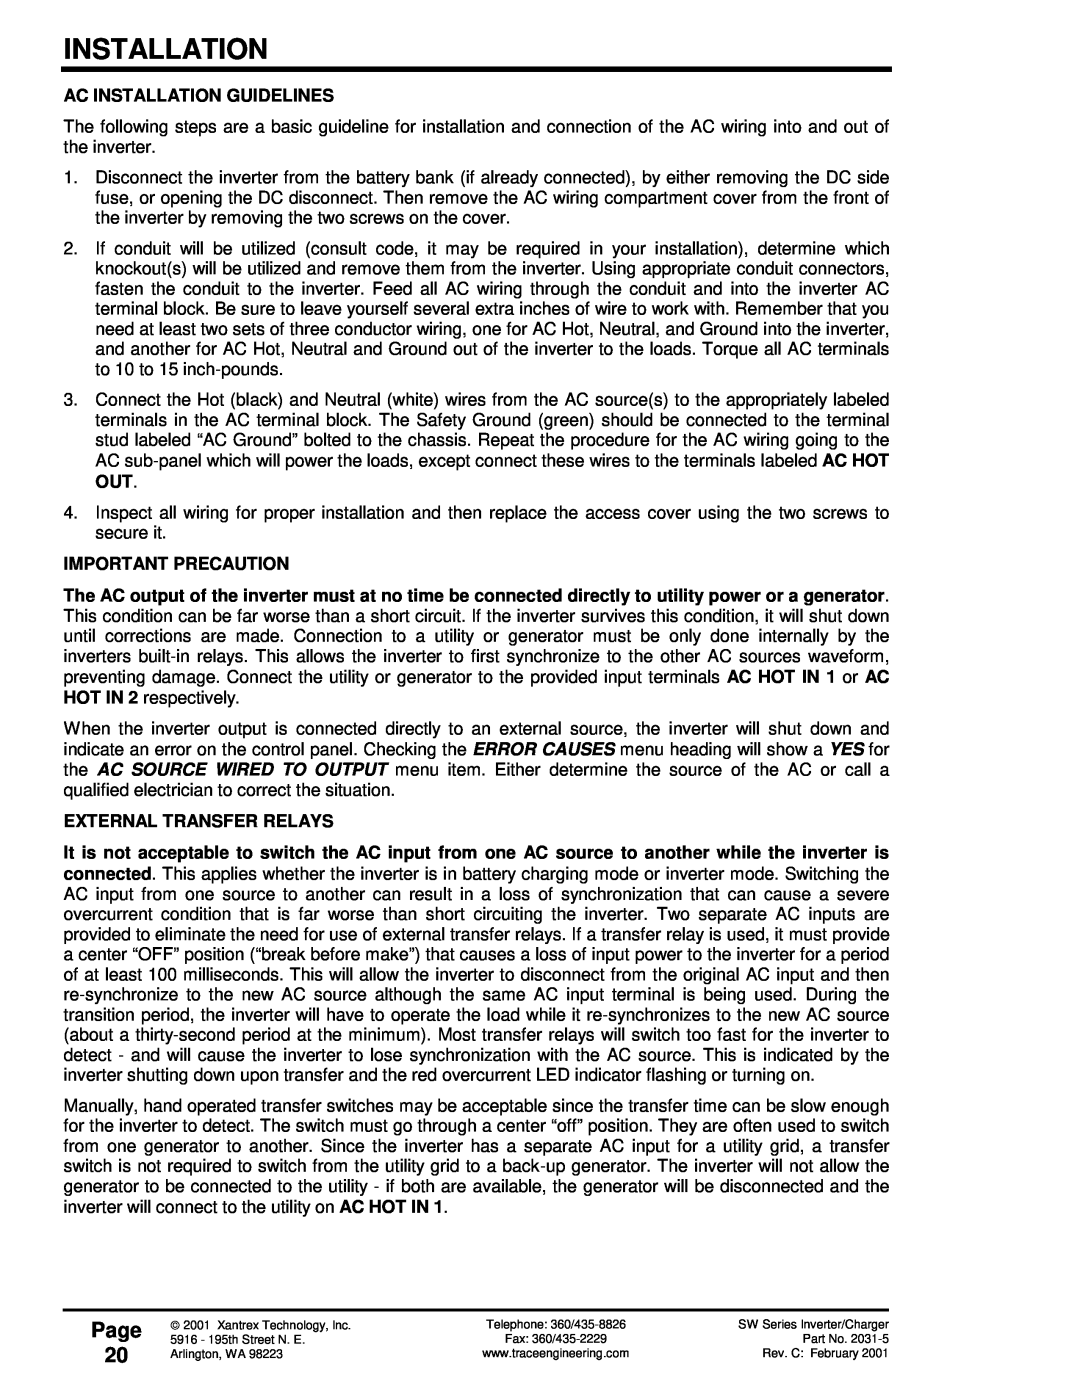 Xantrex Technology SW Series Page 20, Ac Installation Guidelines, Important Precaution, External Transfer Relays 